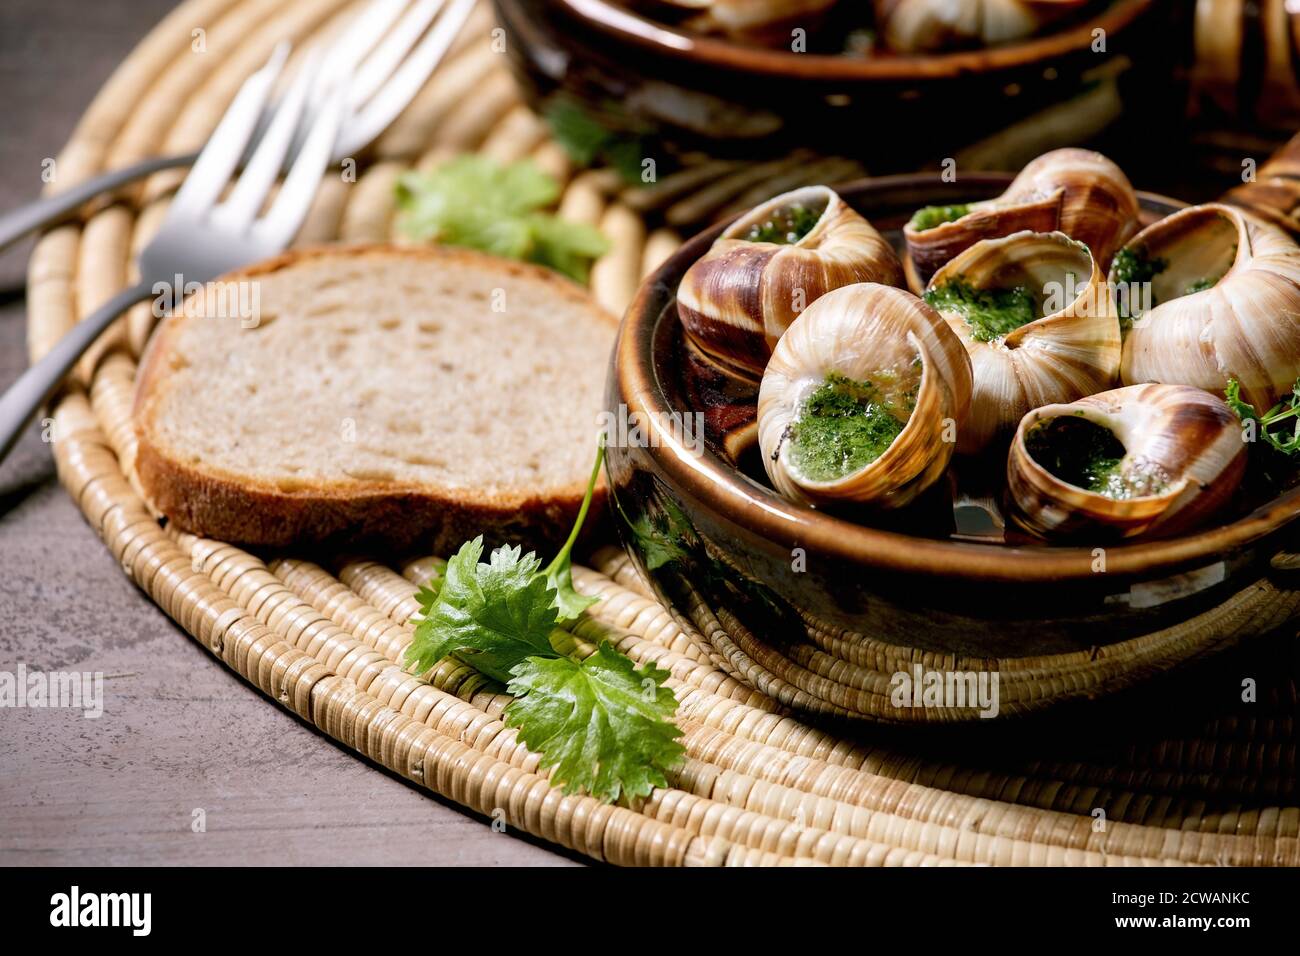 https://c8.alamy.com/comp/2CWANKC/escargots-de-bourgogne-snails-with-herbs-butter-gourmet-dish-in-two-traditional-ceramic-pans-with-coriander-and-bread-on-straw-napkin-close-up-2CWANKC.jpg